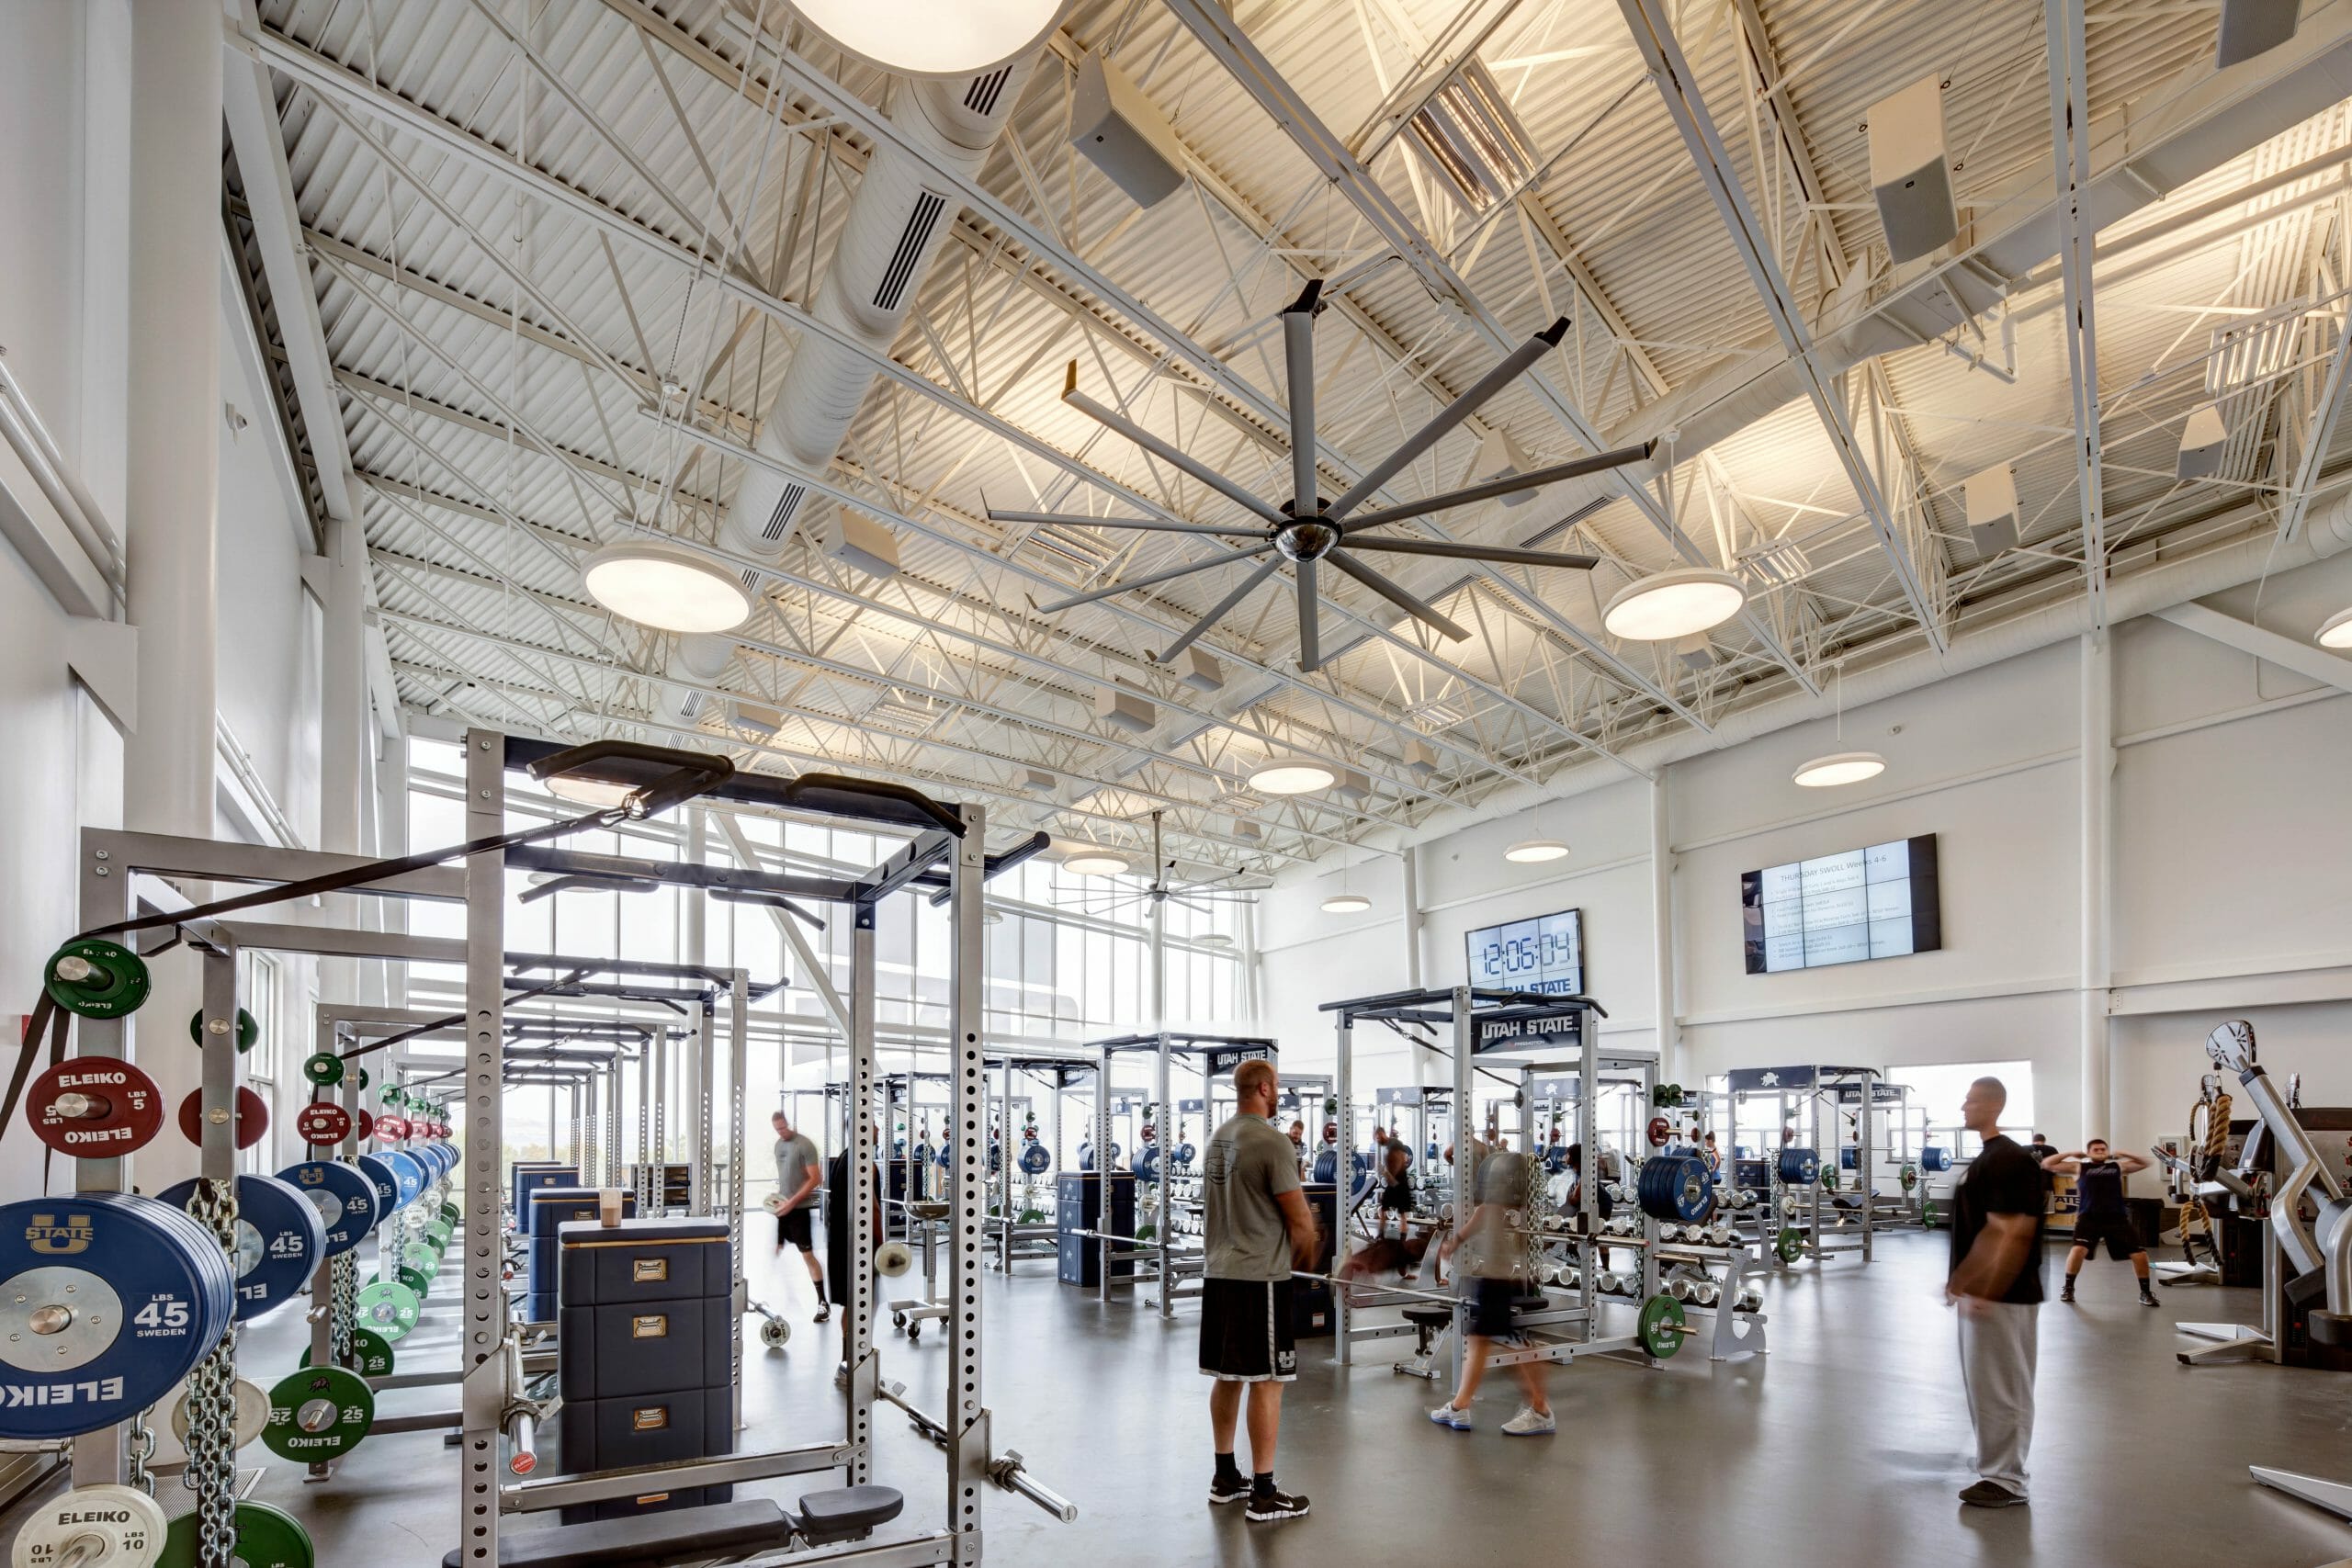 Utah State University Strength and Conditioning Center.